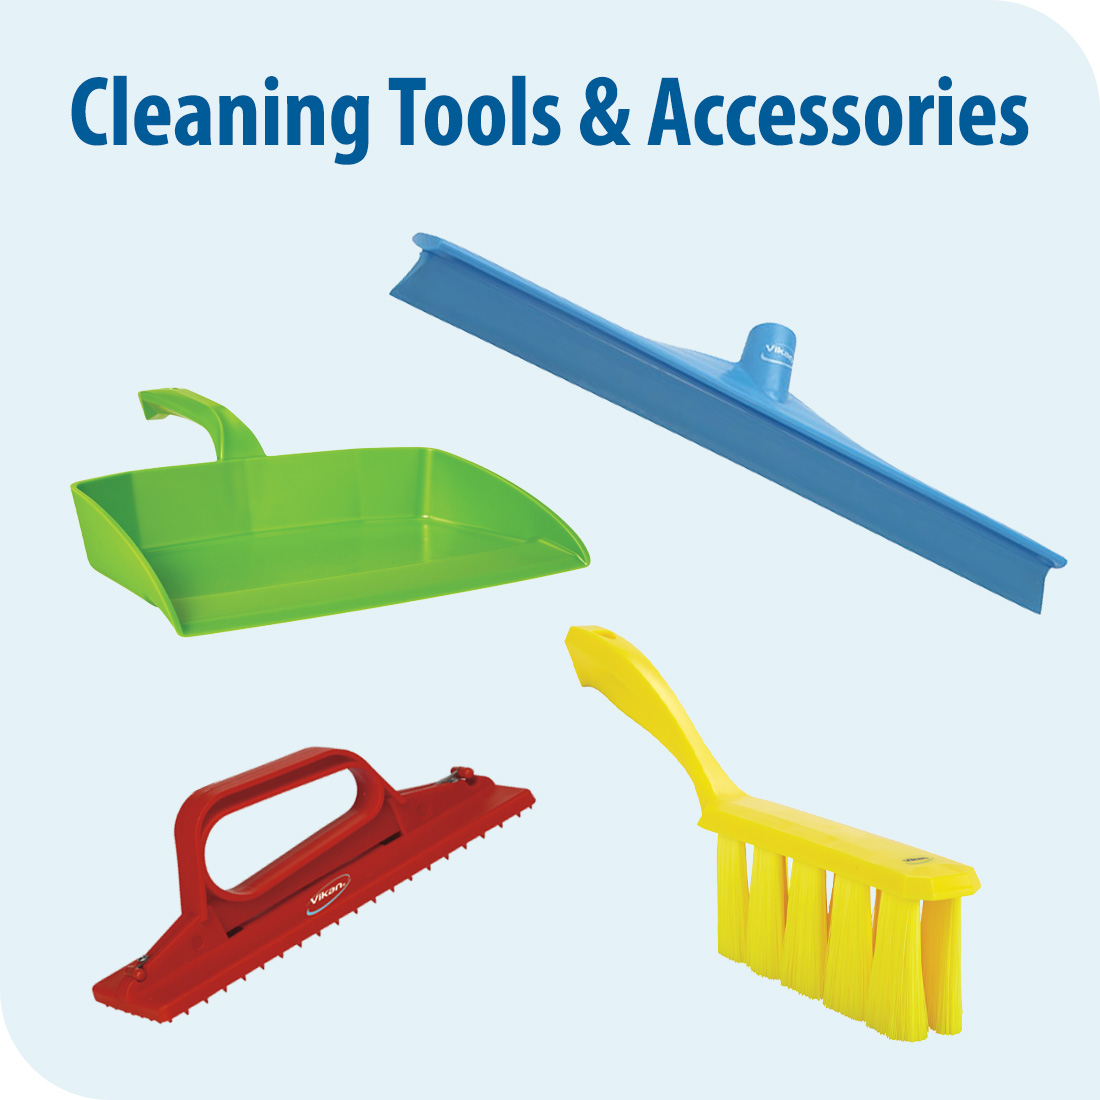 Cleaning Tools and Accessories